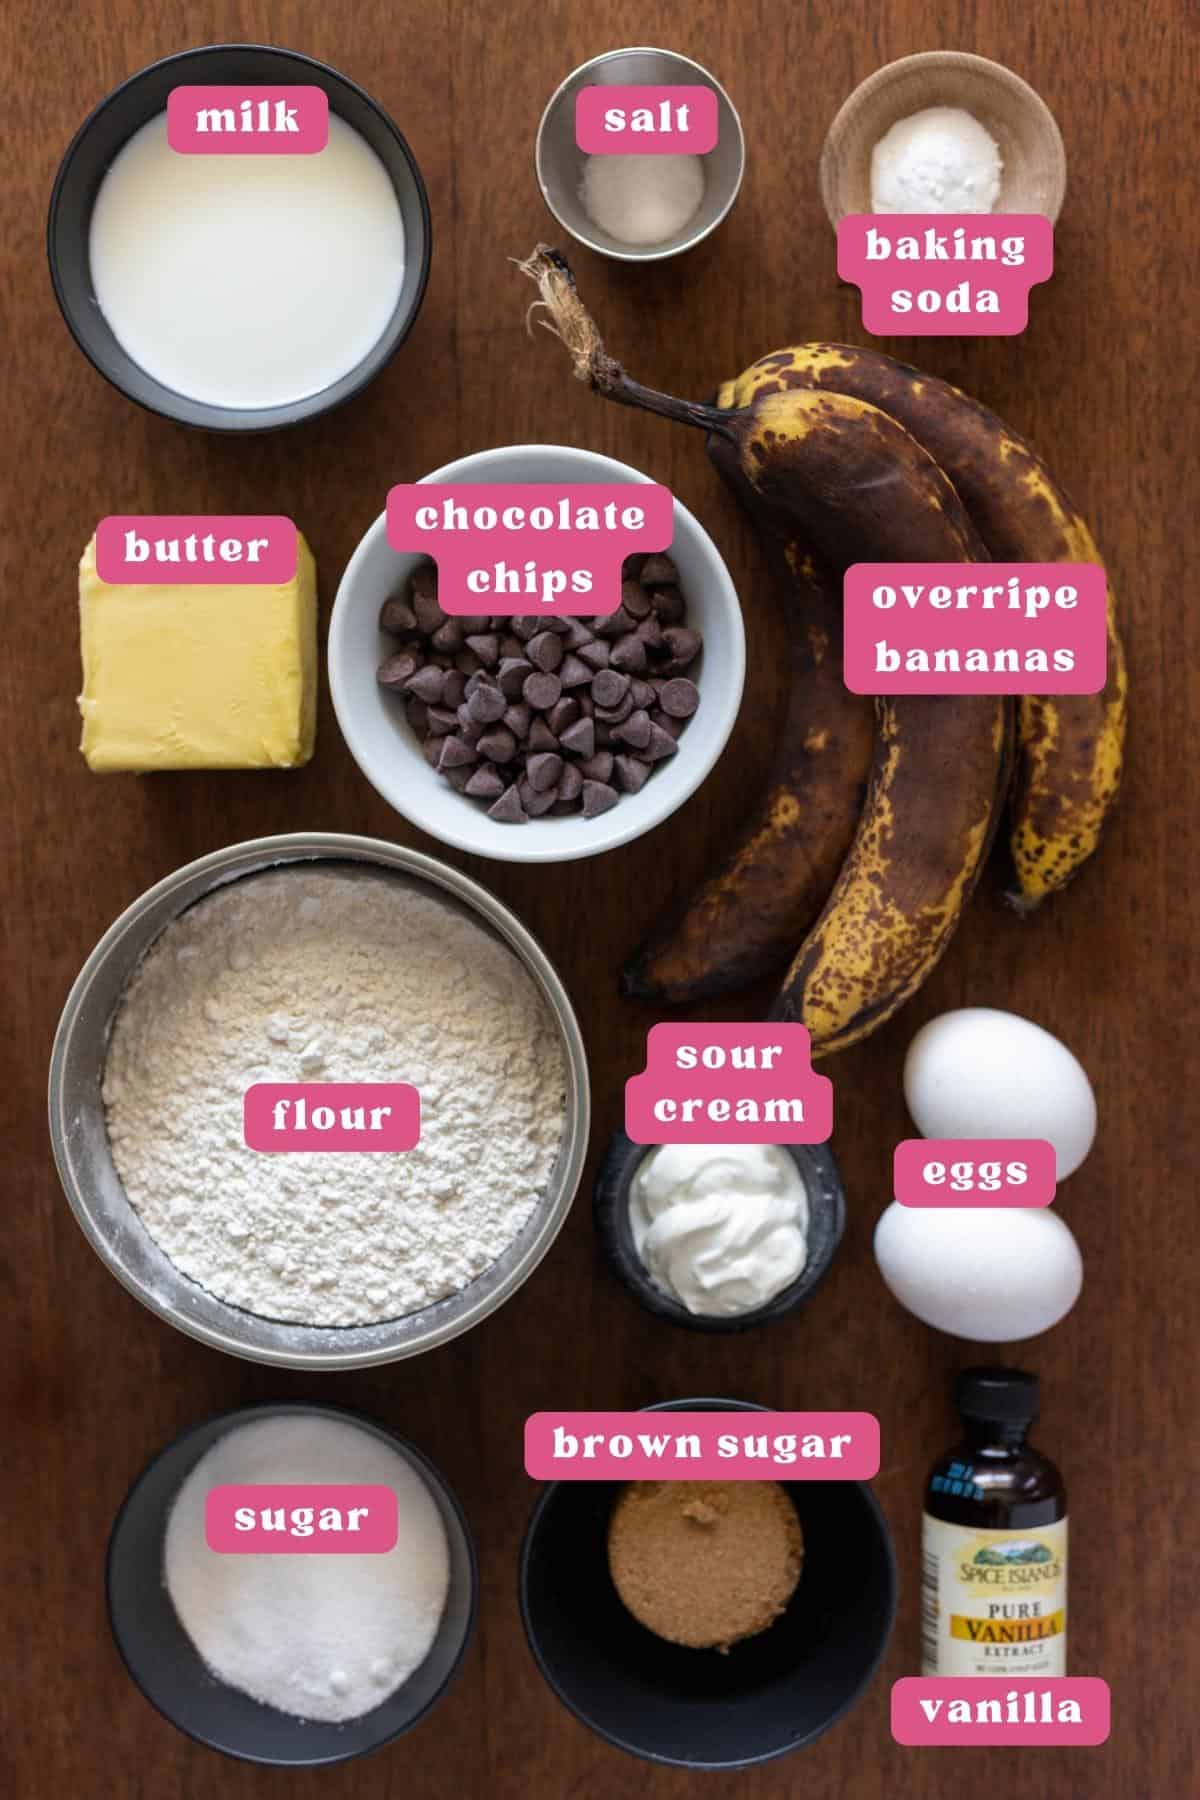 A collage of banana bread ingredients labeled in pink and white labels